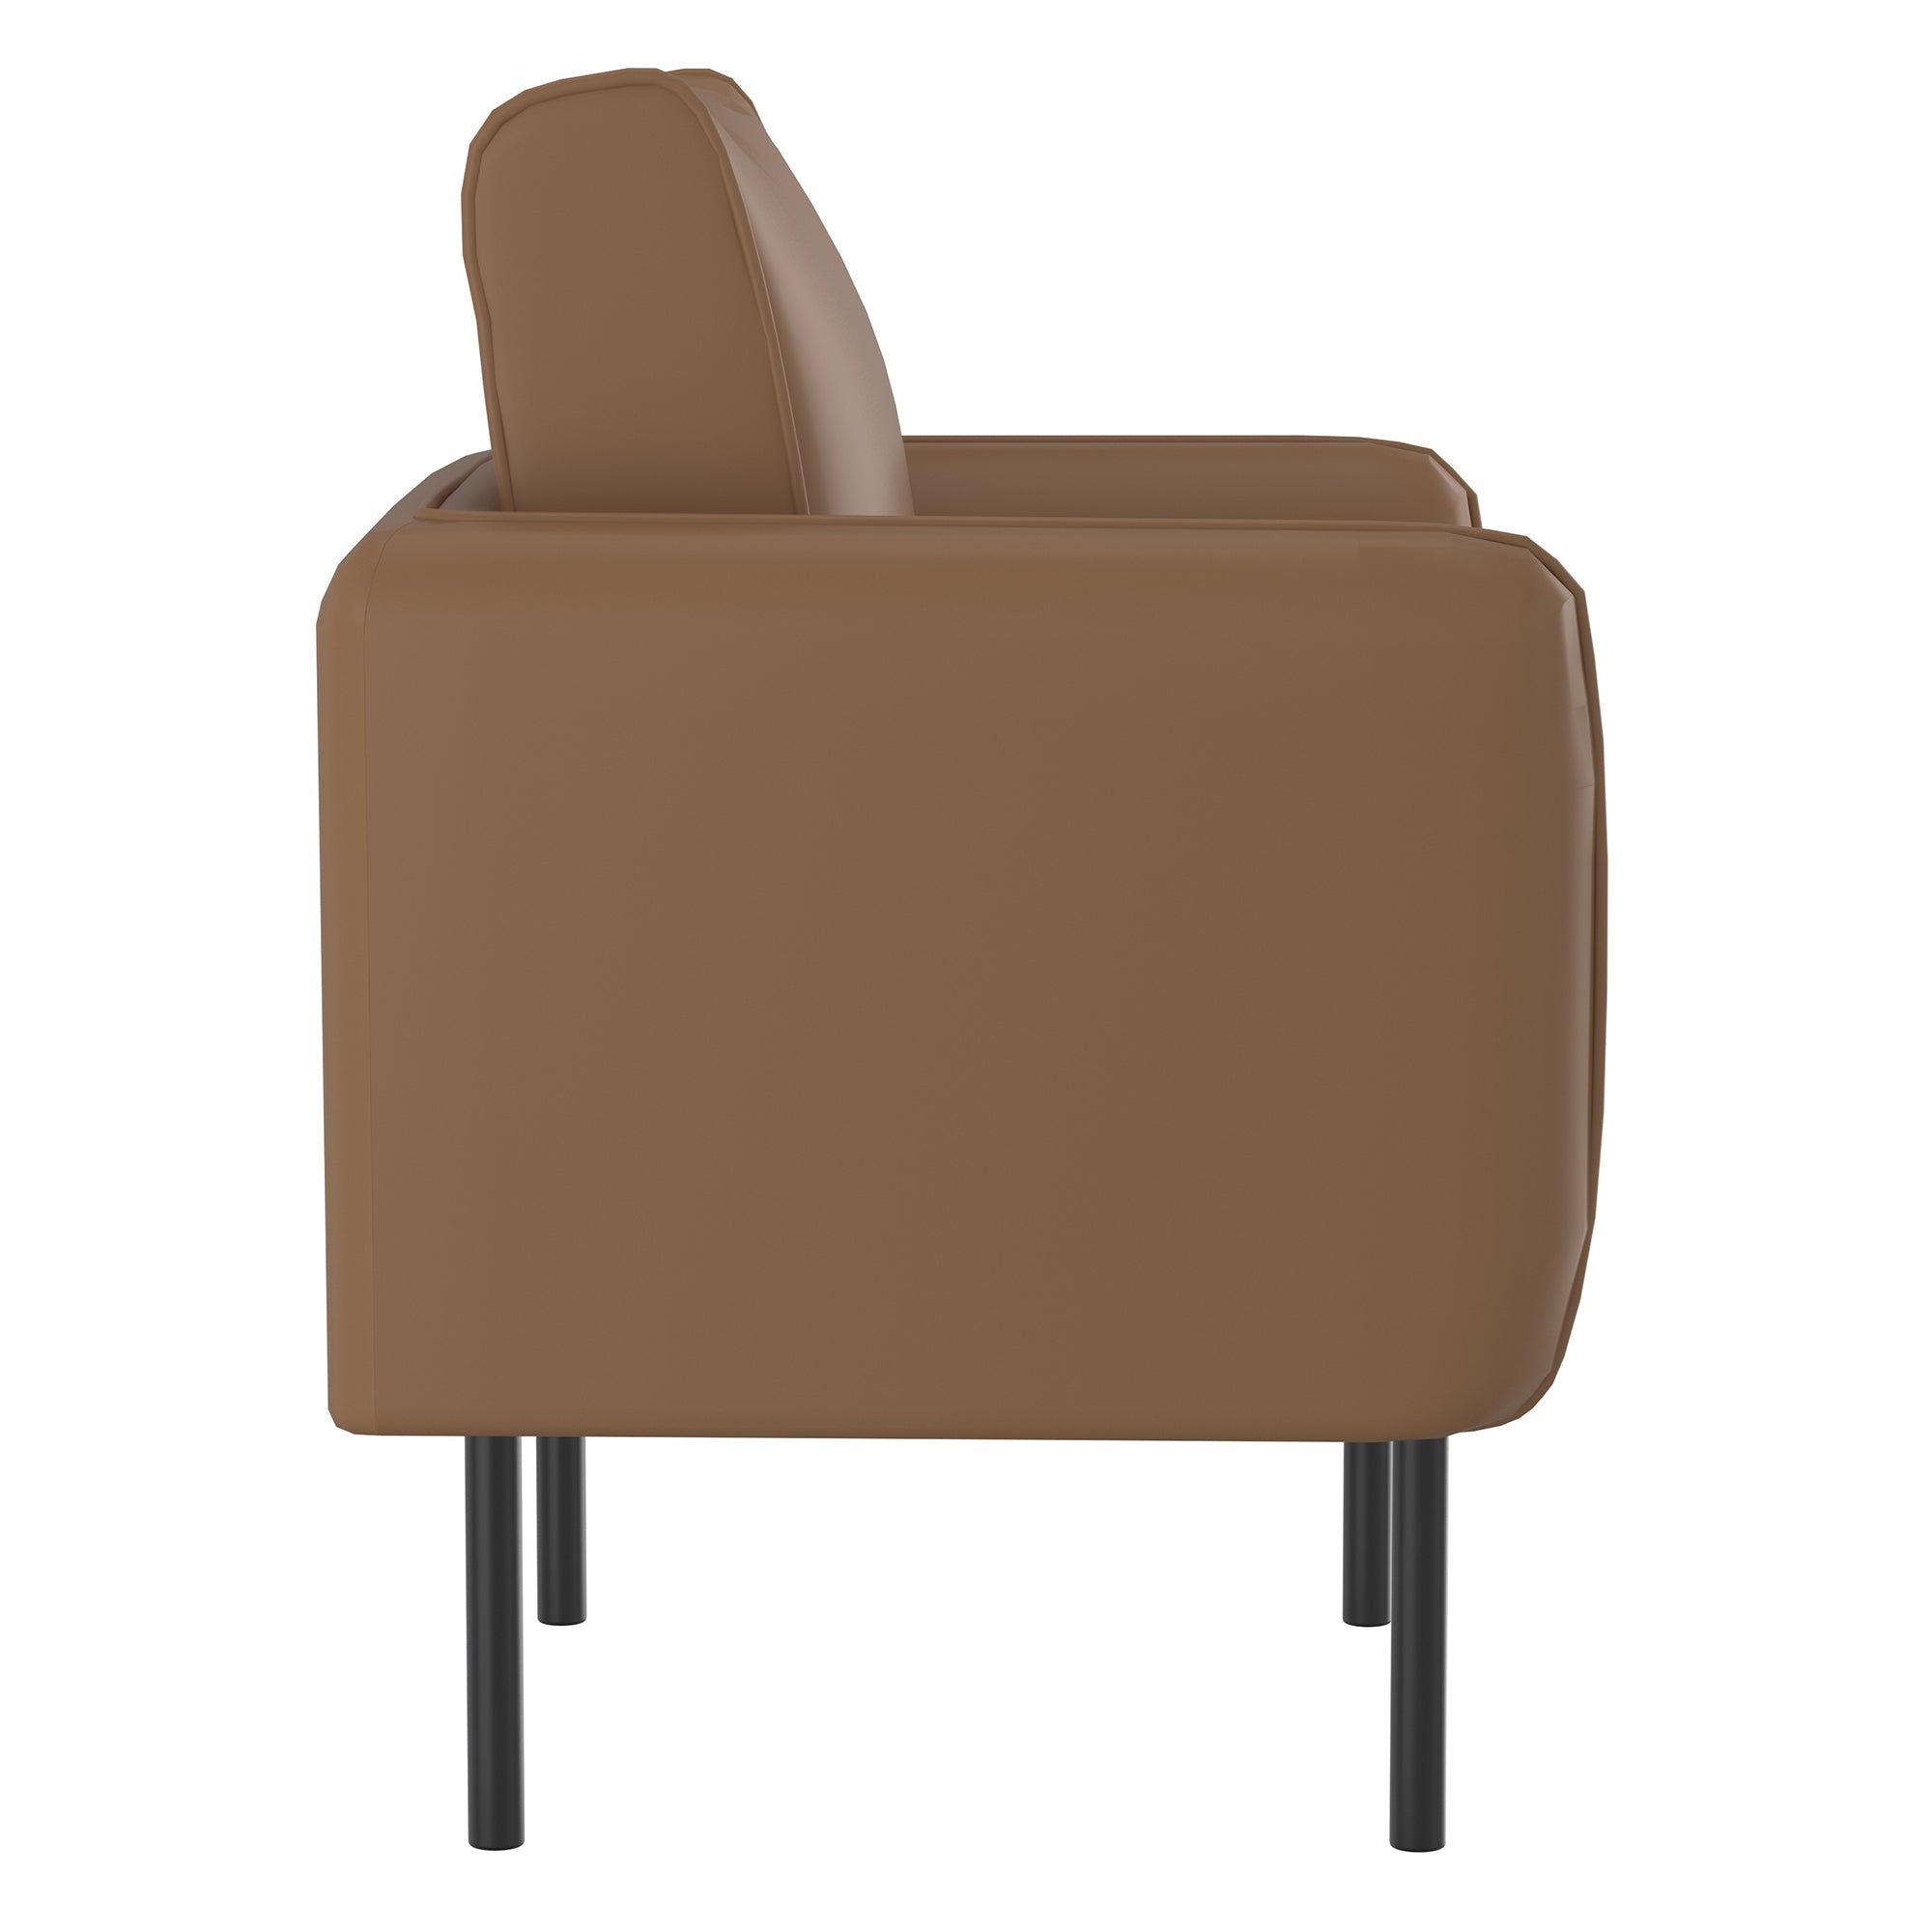 RYKER-ACCENT CHAIR-SADDLE